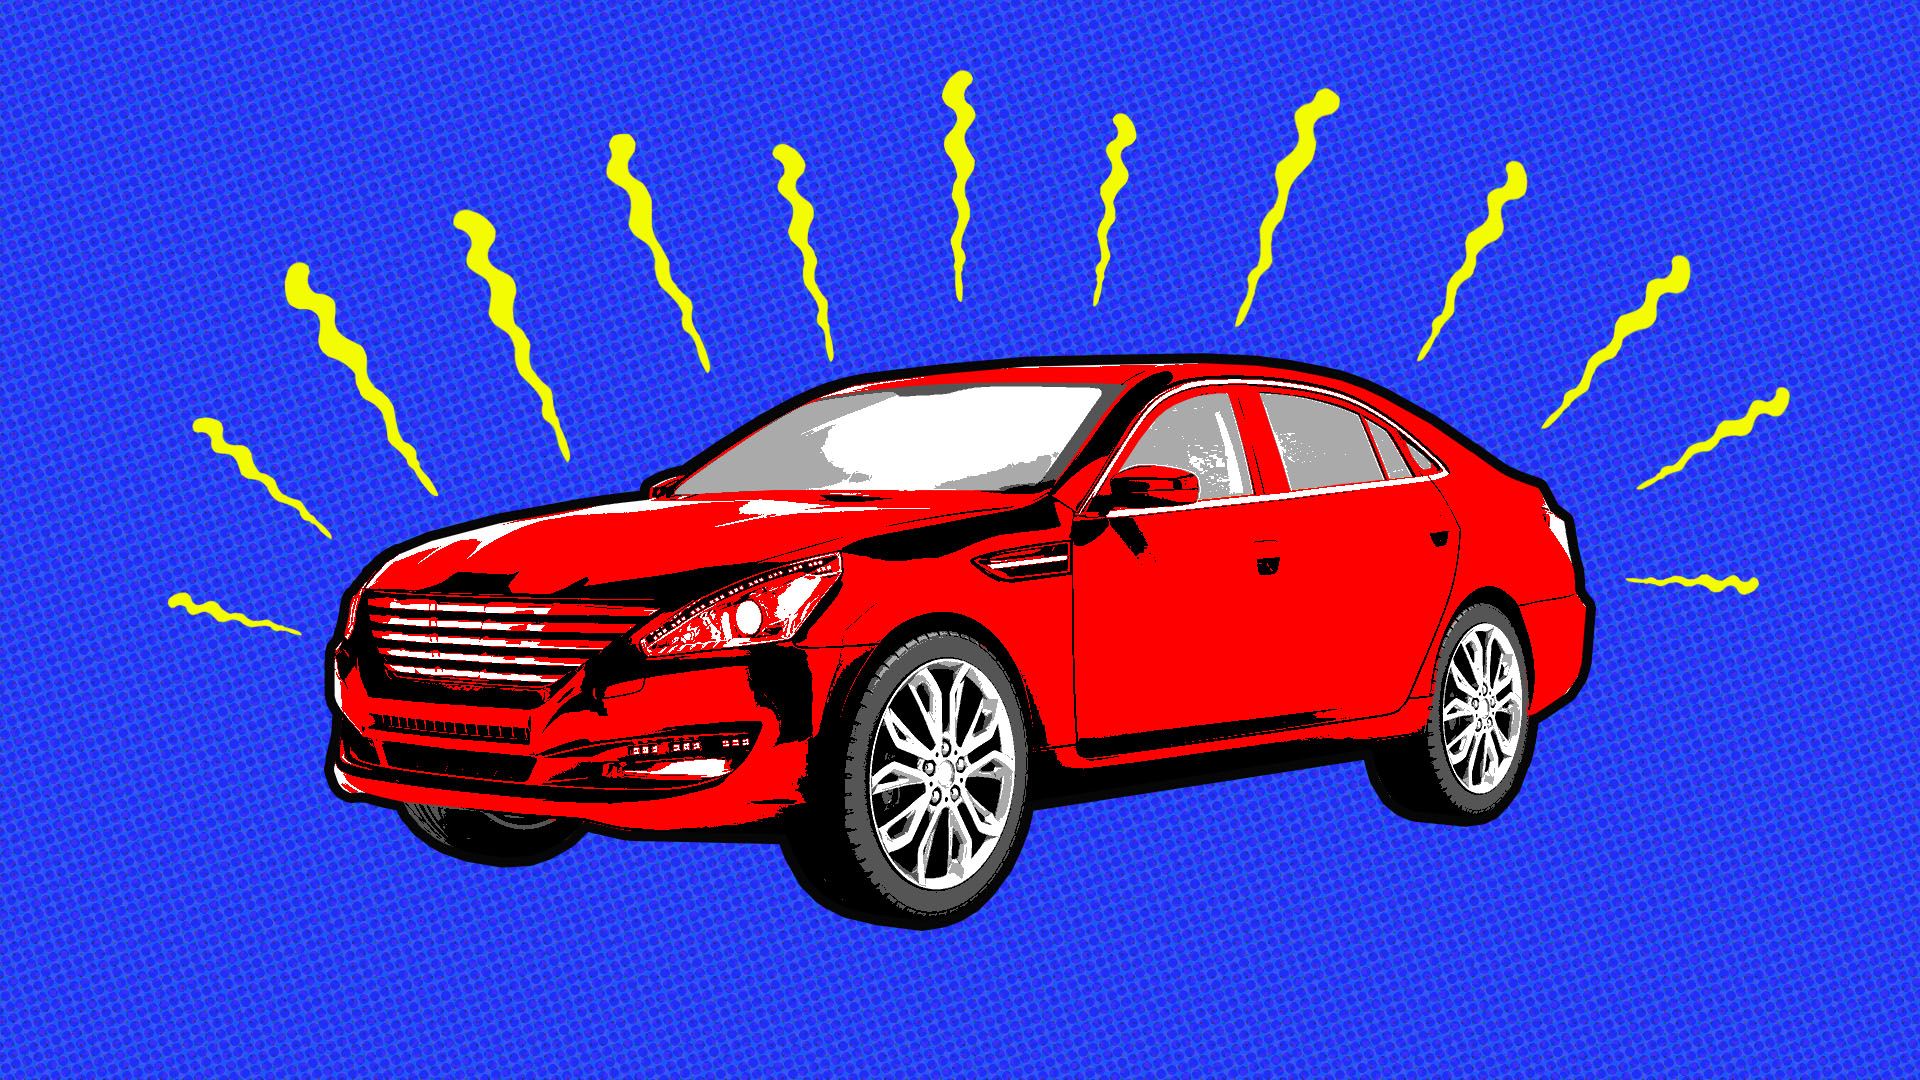 Illustration of a comic-book style car with "spidey sense" squiggly lines around it